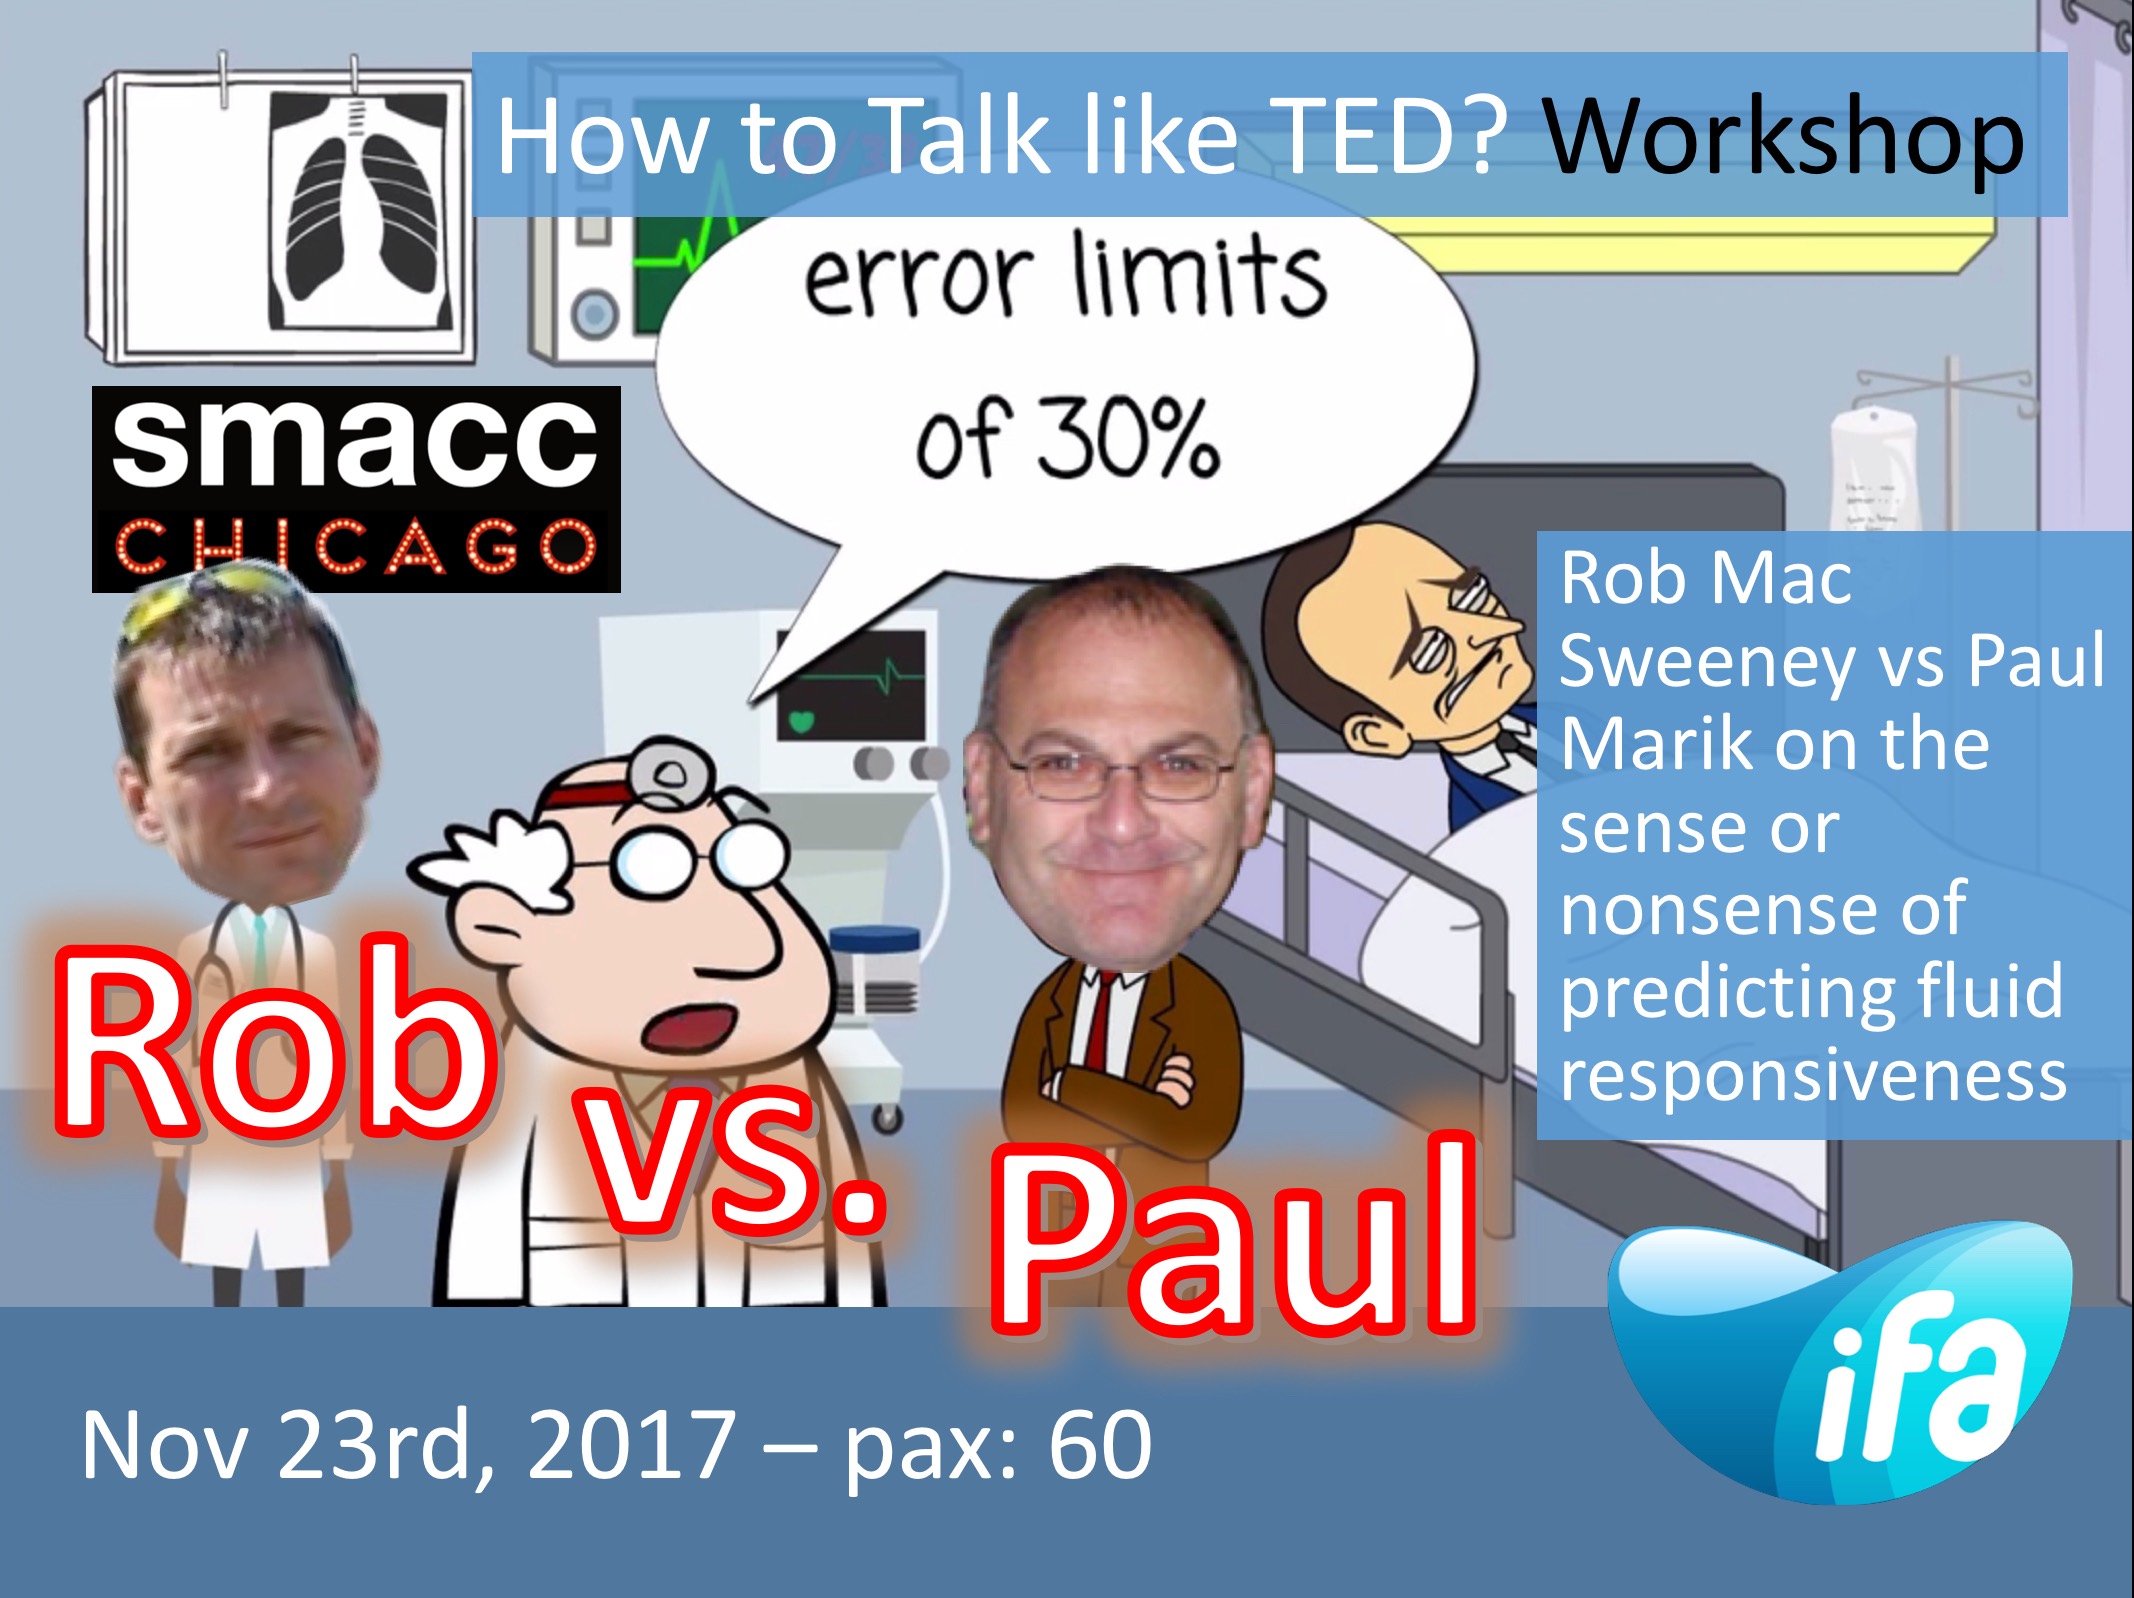 Workshop on How to talk like TED?